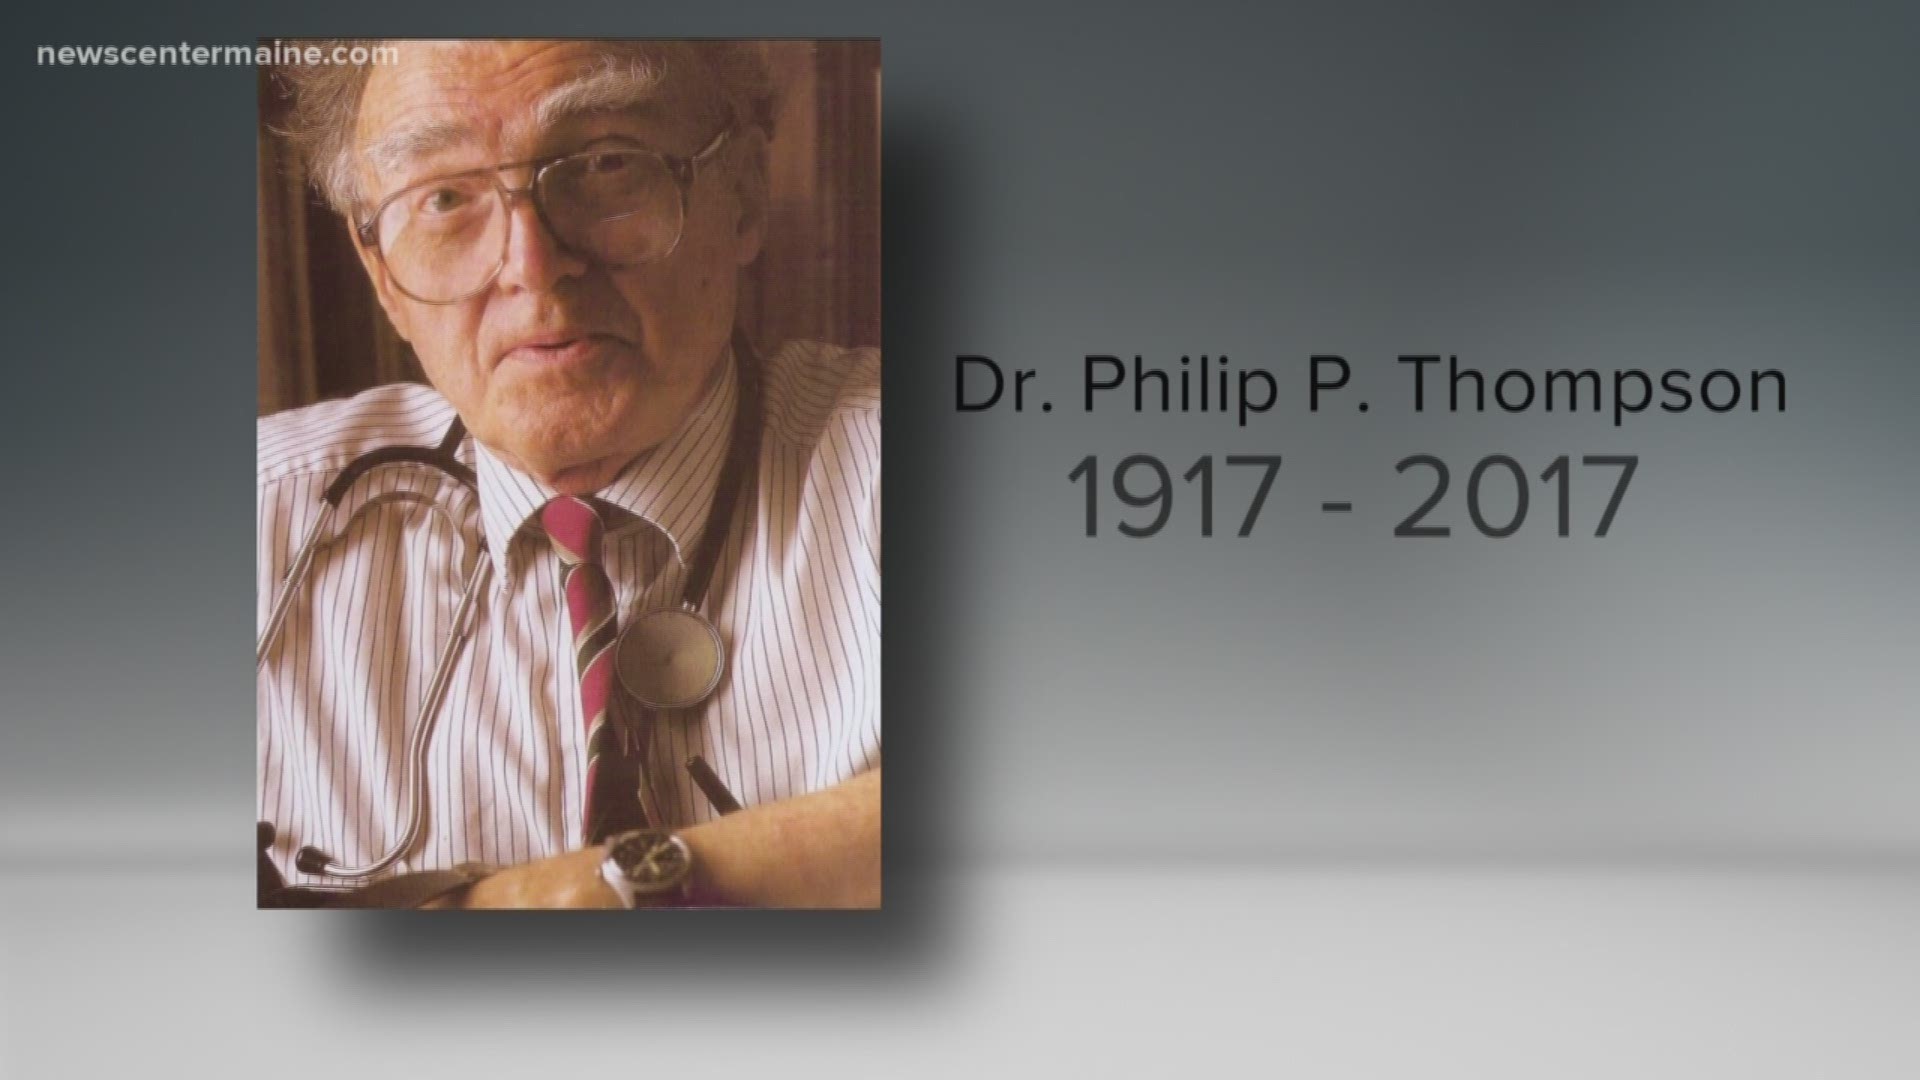 Dr. Philip P. Thompson was 102 years old when he died on Wednesday.